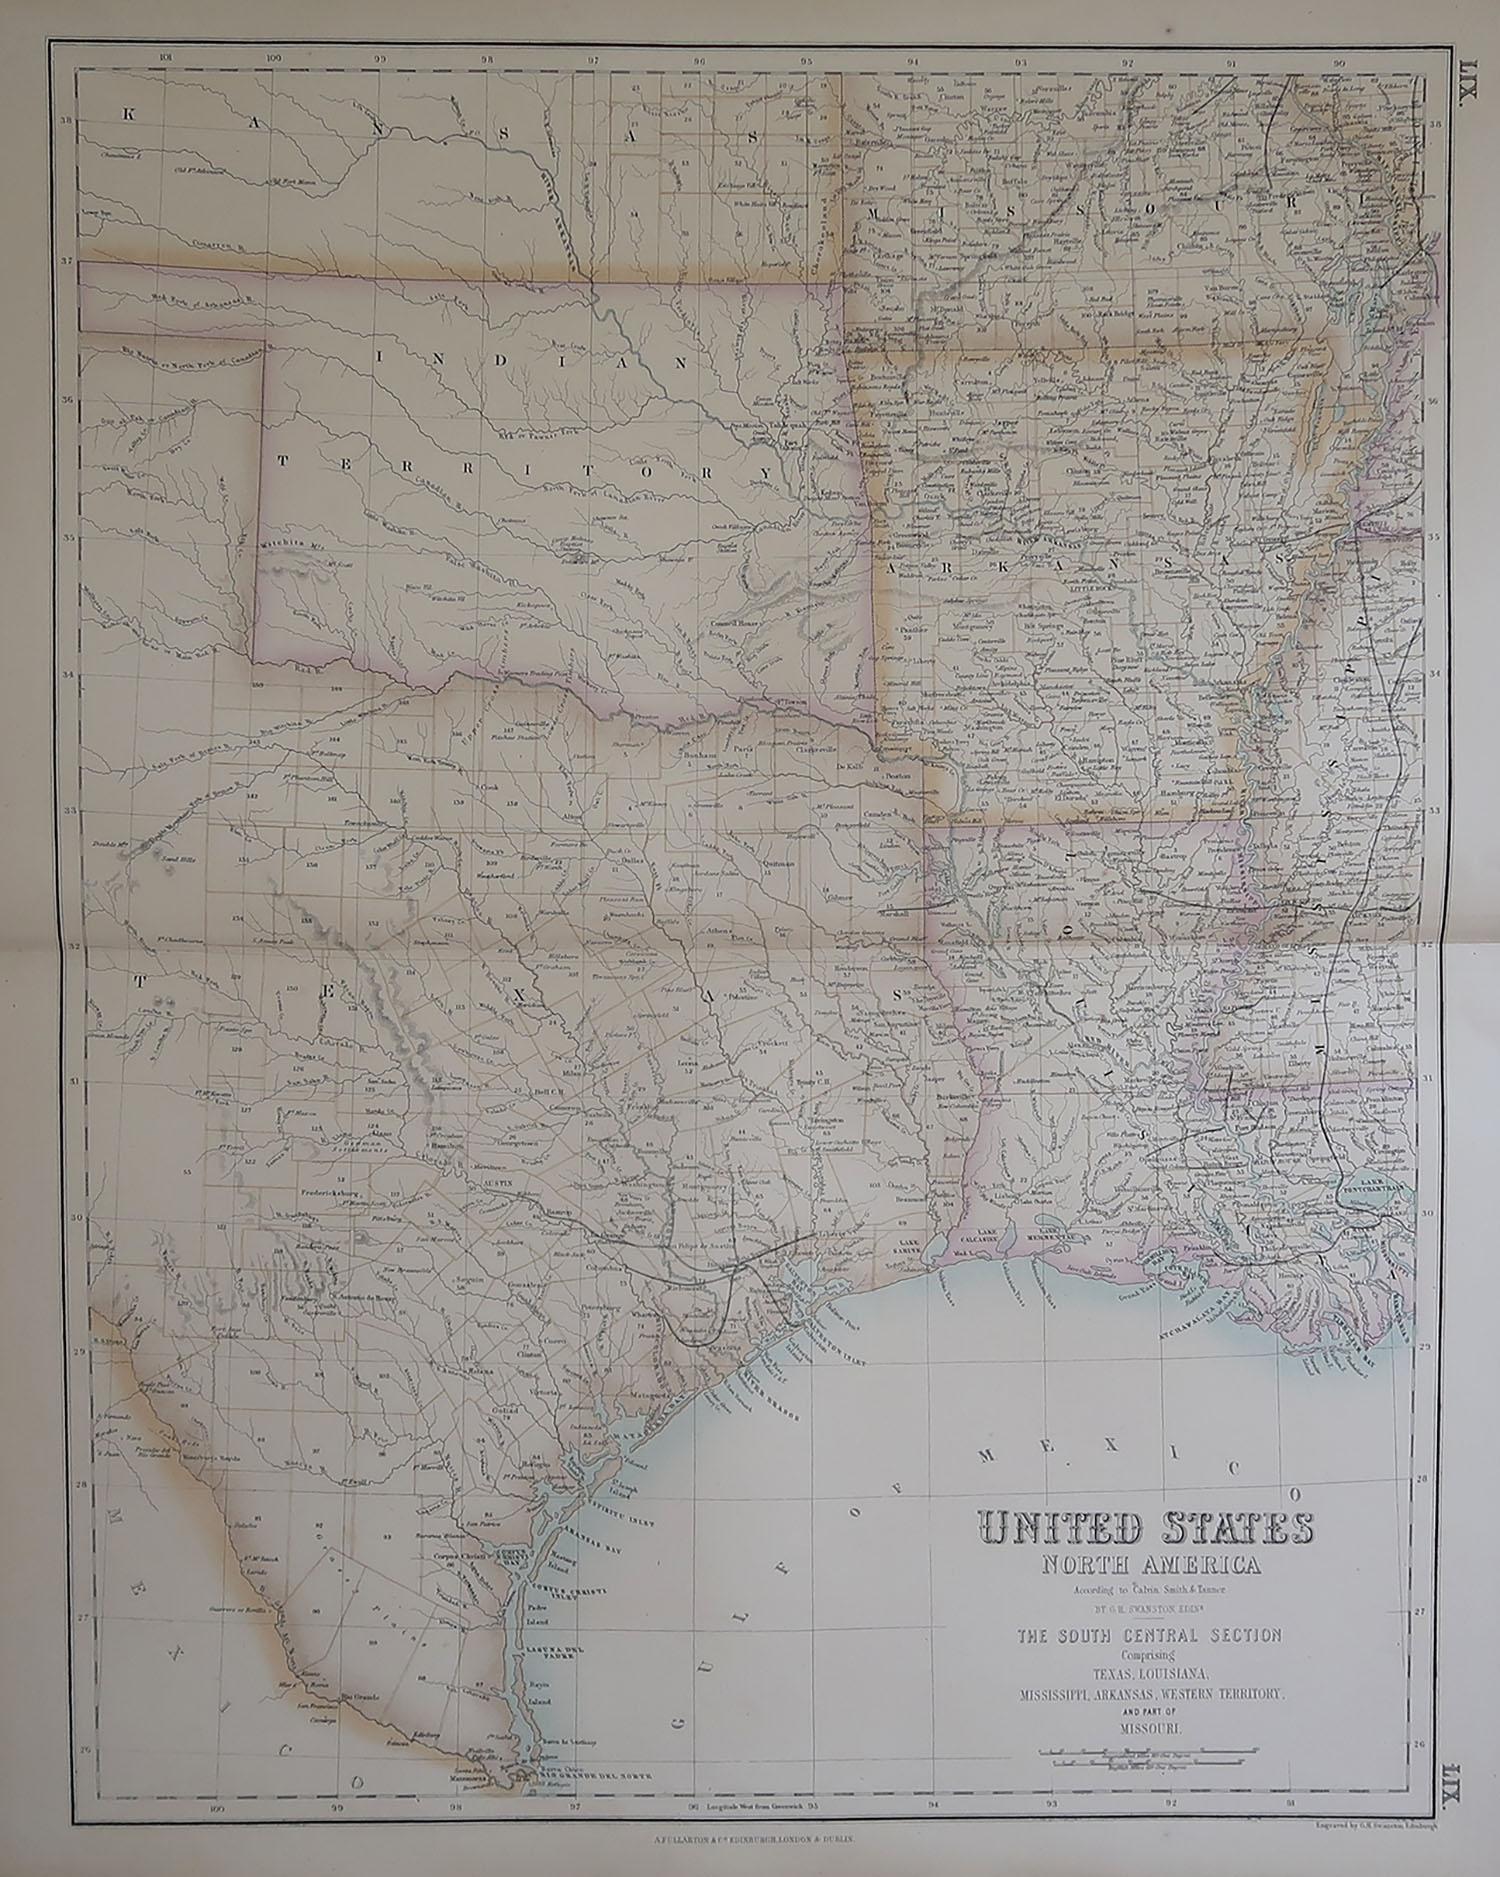 Great map of Texas. Also showing Indian Territory, Arkansas, Louisiana etc

From the celebrated Royal Illustrated Atlas

Lithograph by Swanston. Original color. 

Published by Fullarton, Edinburgh. C.1870